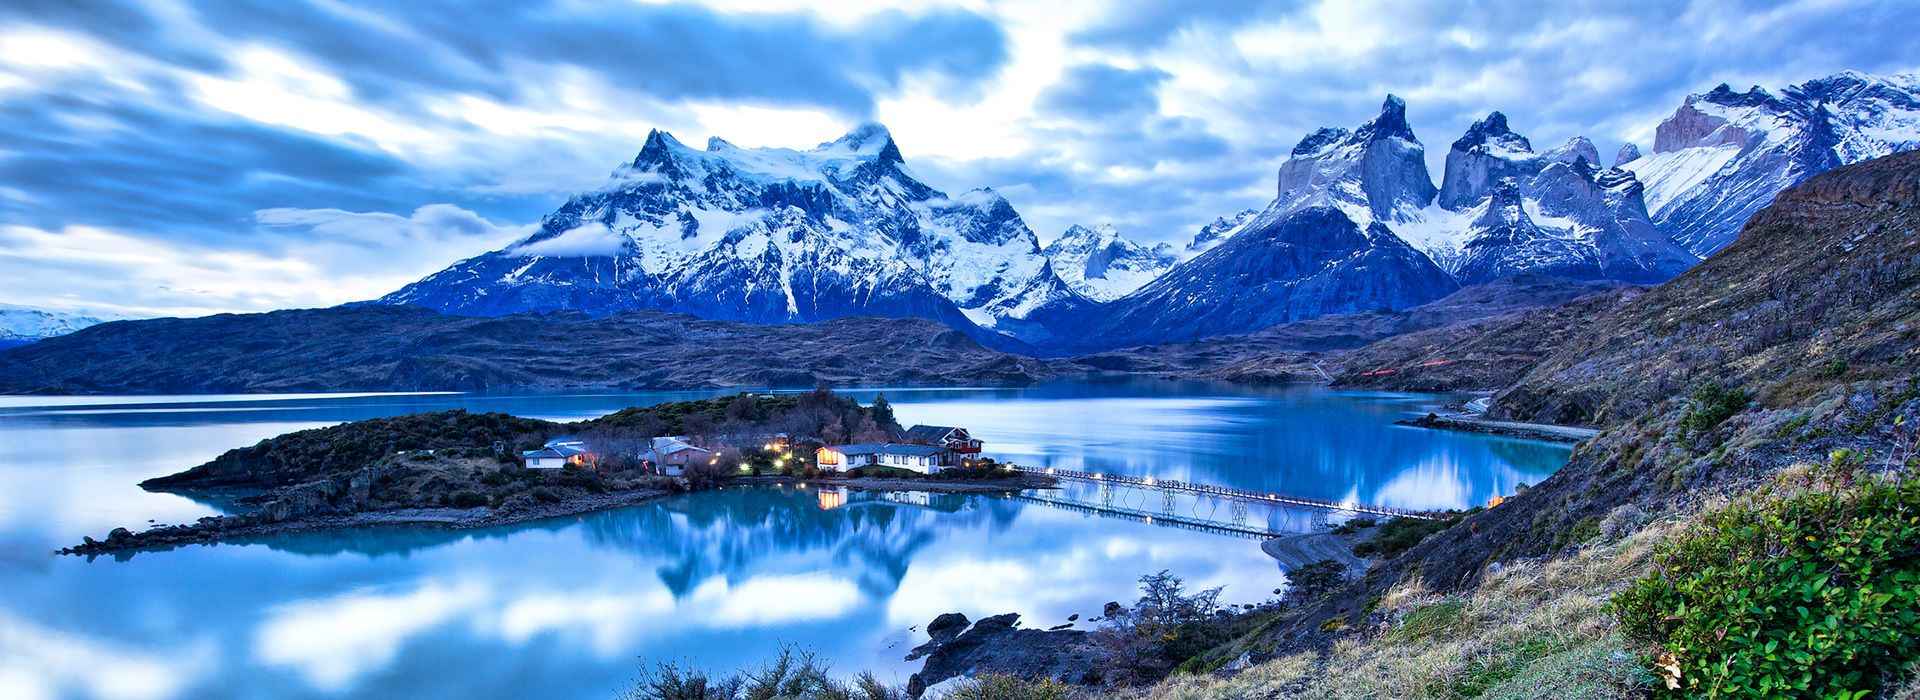 Chile Travel Guide - Travel Insights and Tips